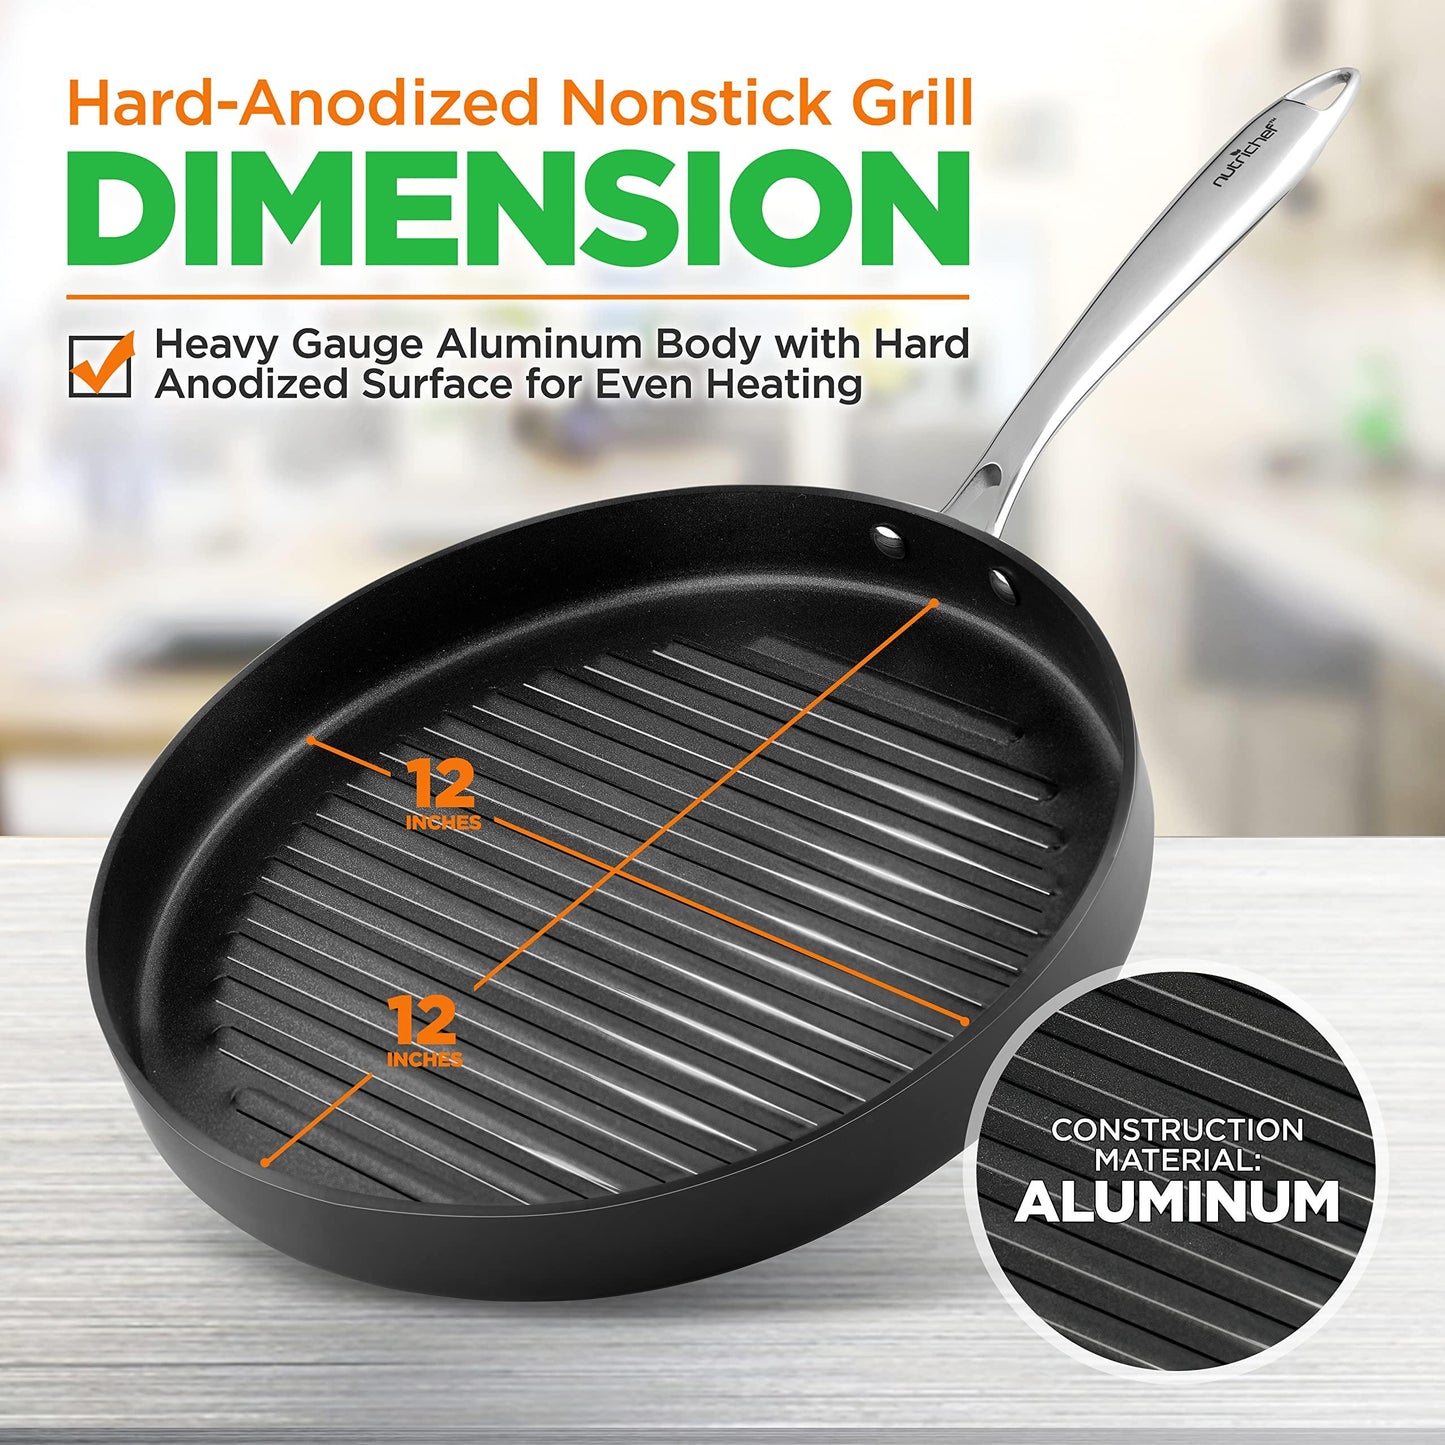 NutriChef Anodized Non-Stick Grill - Dishwasher Safe Nonstick Grill Pan Heavy Gauge Aluminum Body with Hard Anodized Surface for Even Heating, Max Temperature: 500° Fahrenheit (260° Celsius) - CookCave